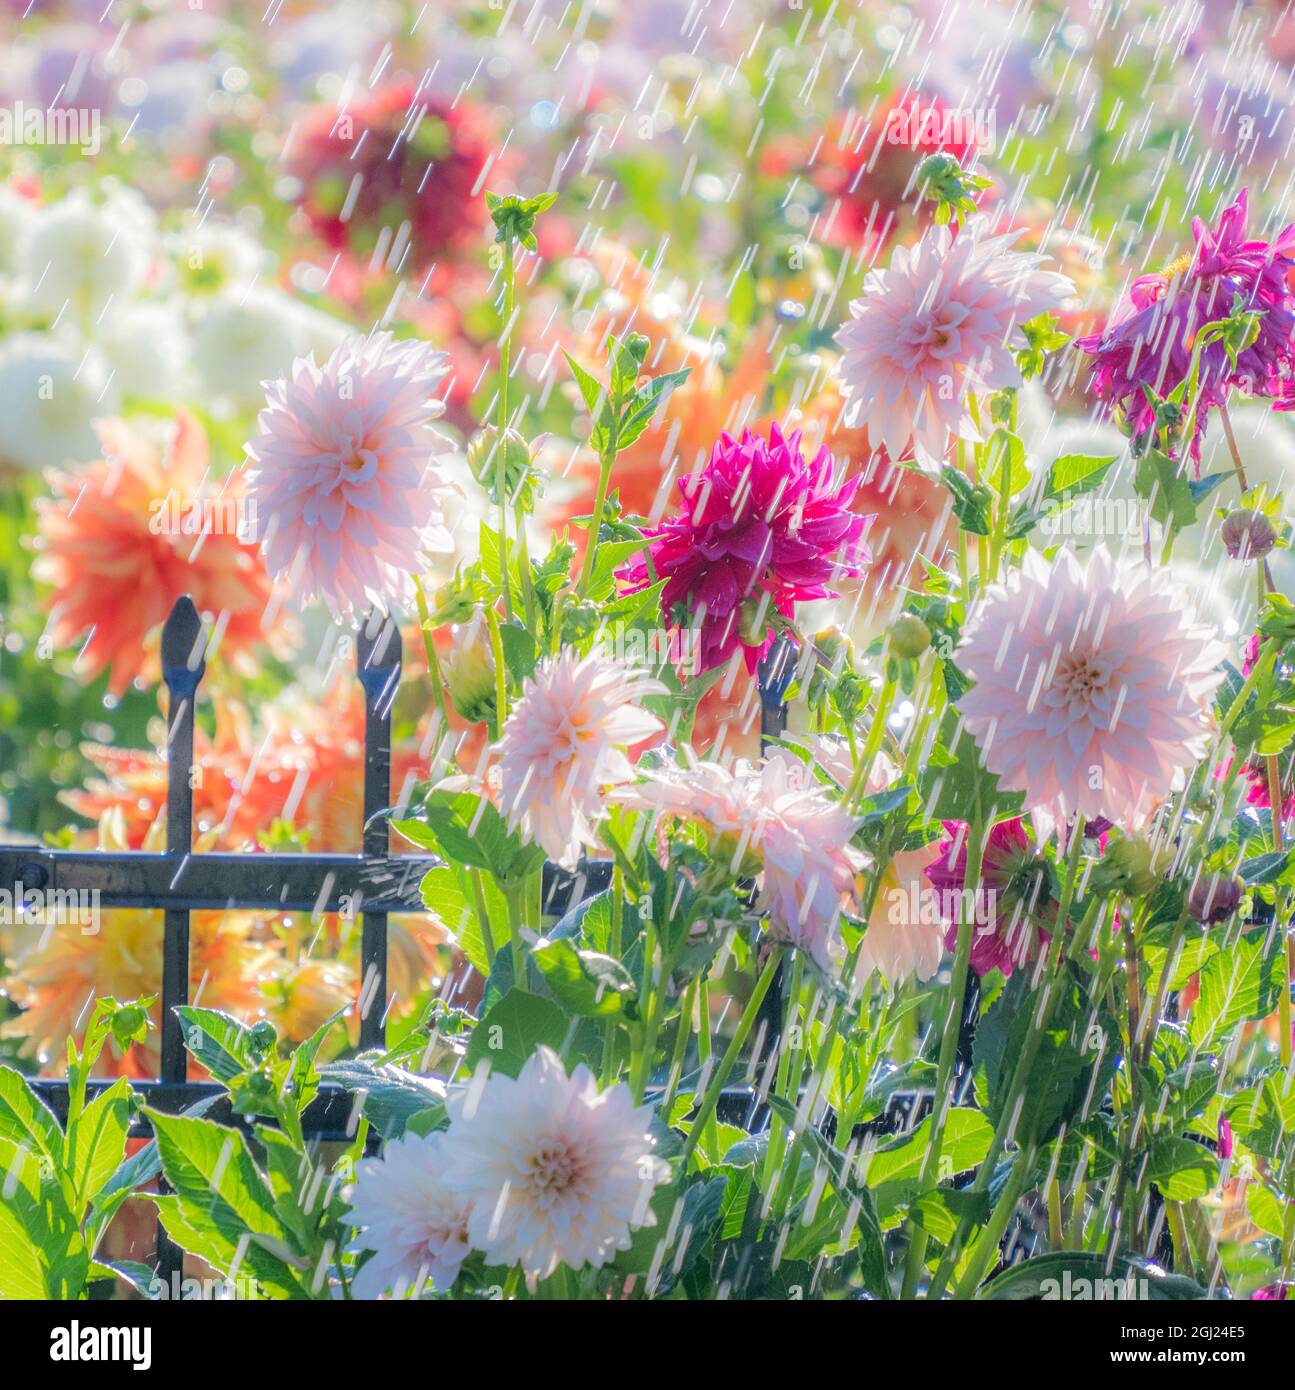 USA, Oregon, Canby, Swan Island Dahlias, water coming down on flowers Stock Photo